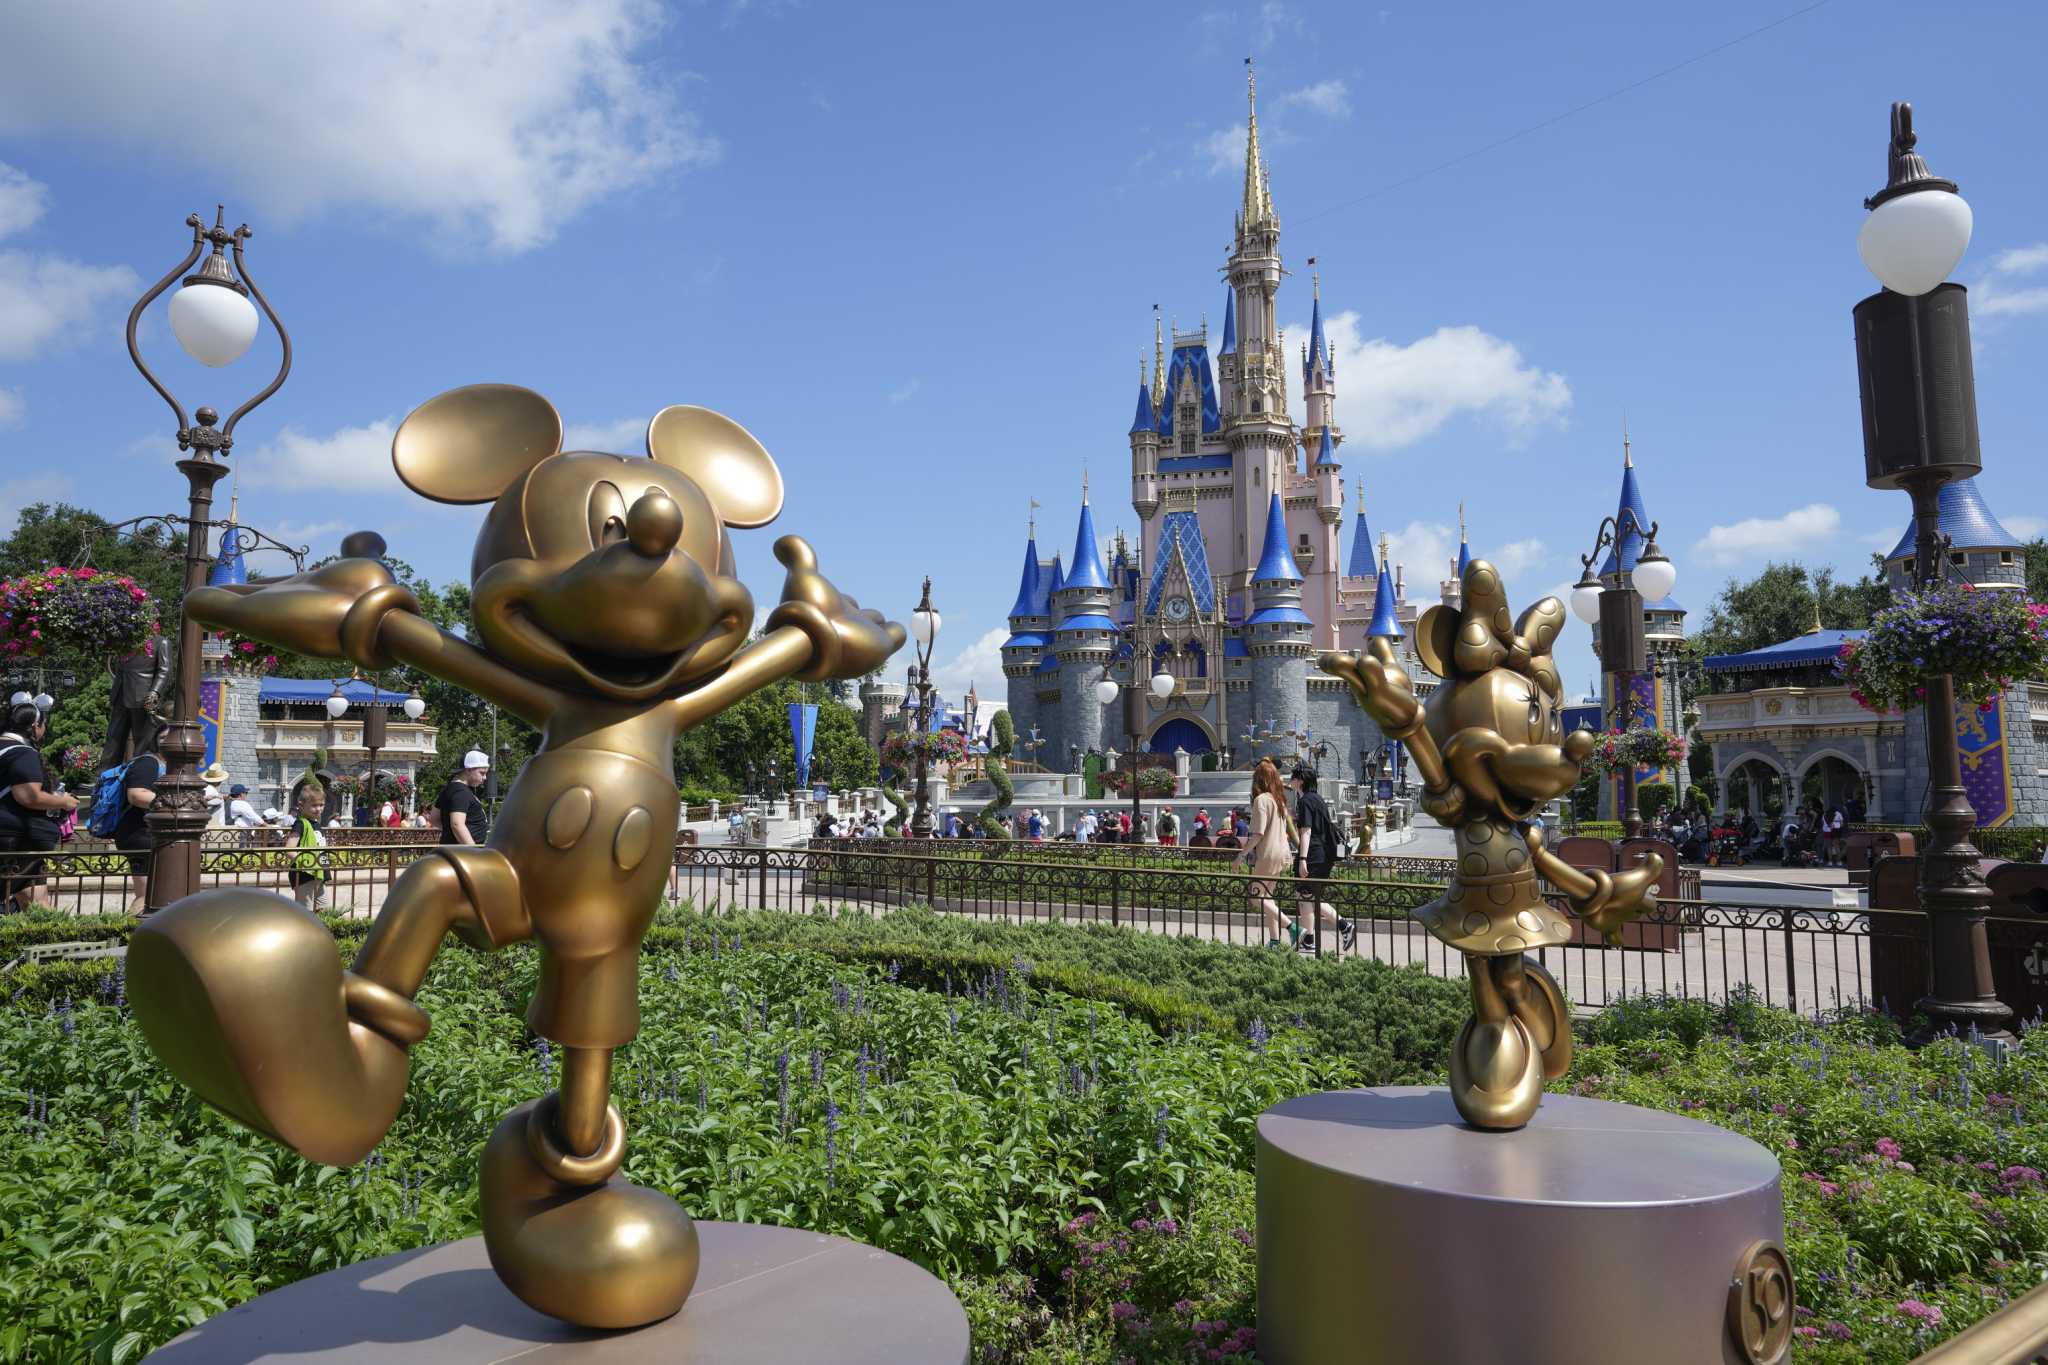 New 50% Off Kids Play & Dine Offer Coming to Walt Disney World in November